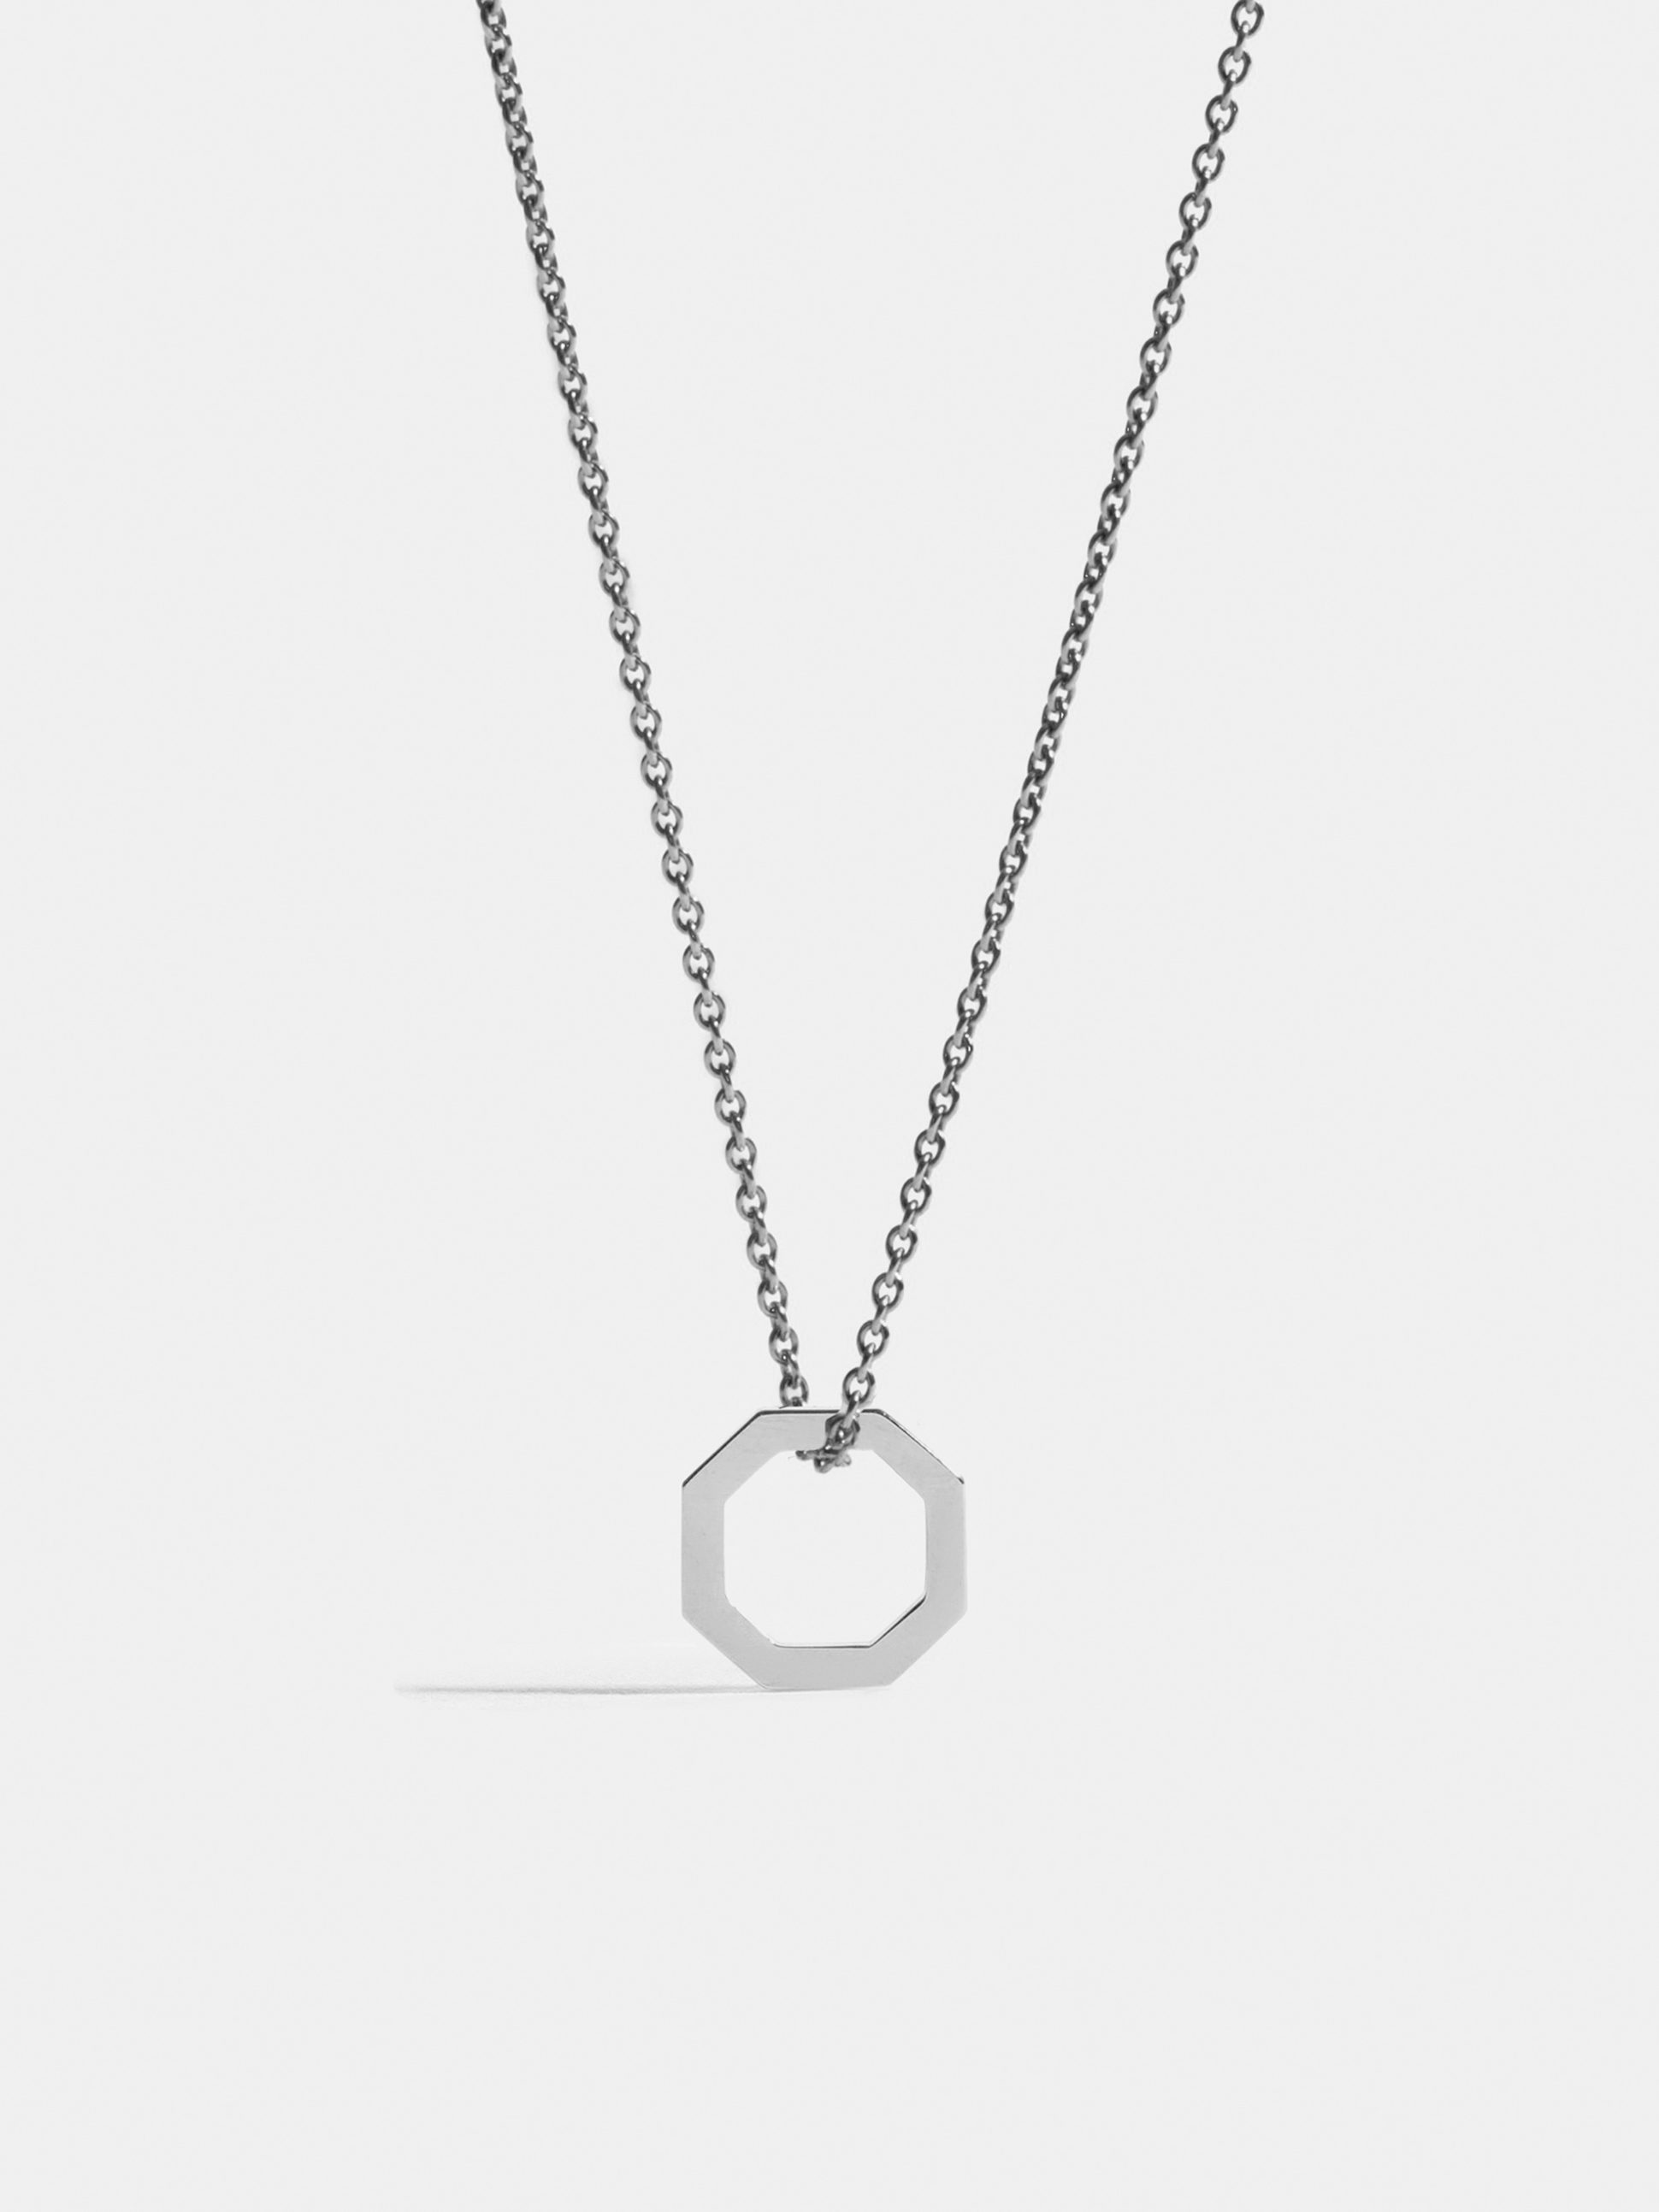 Octogone 10mm pendant in 18k Fairmined ethical white gold, on a chain.